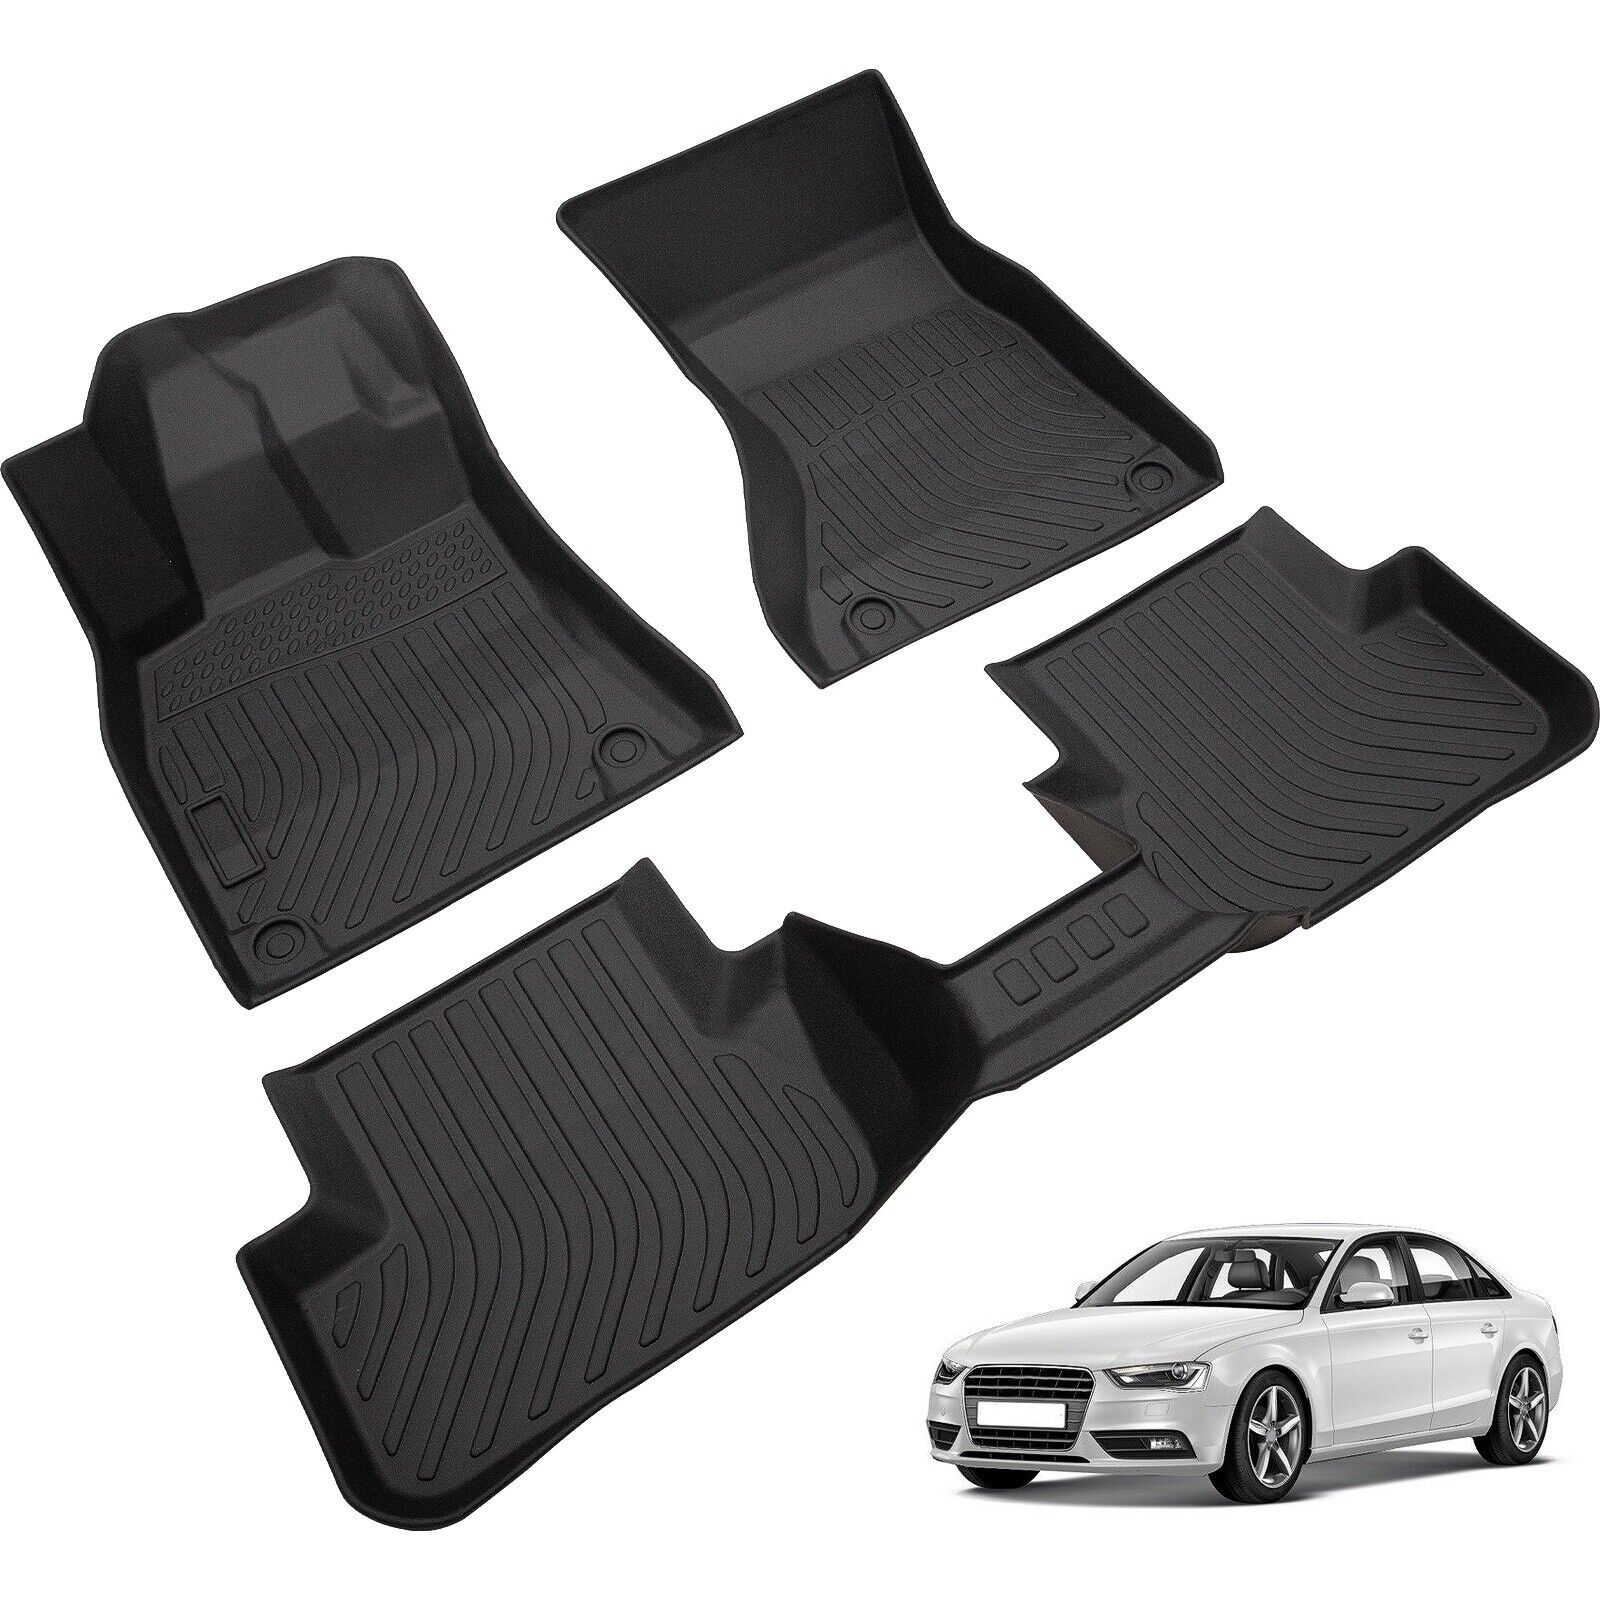 Car Floor Mats Liner for Audi A4 A4 Quattro S4 2009-2016 Rubber TPE All-Weather